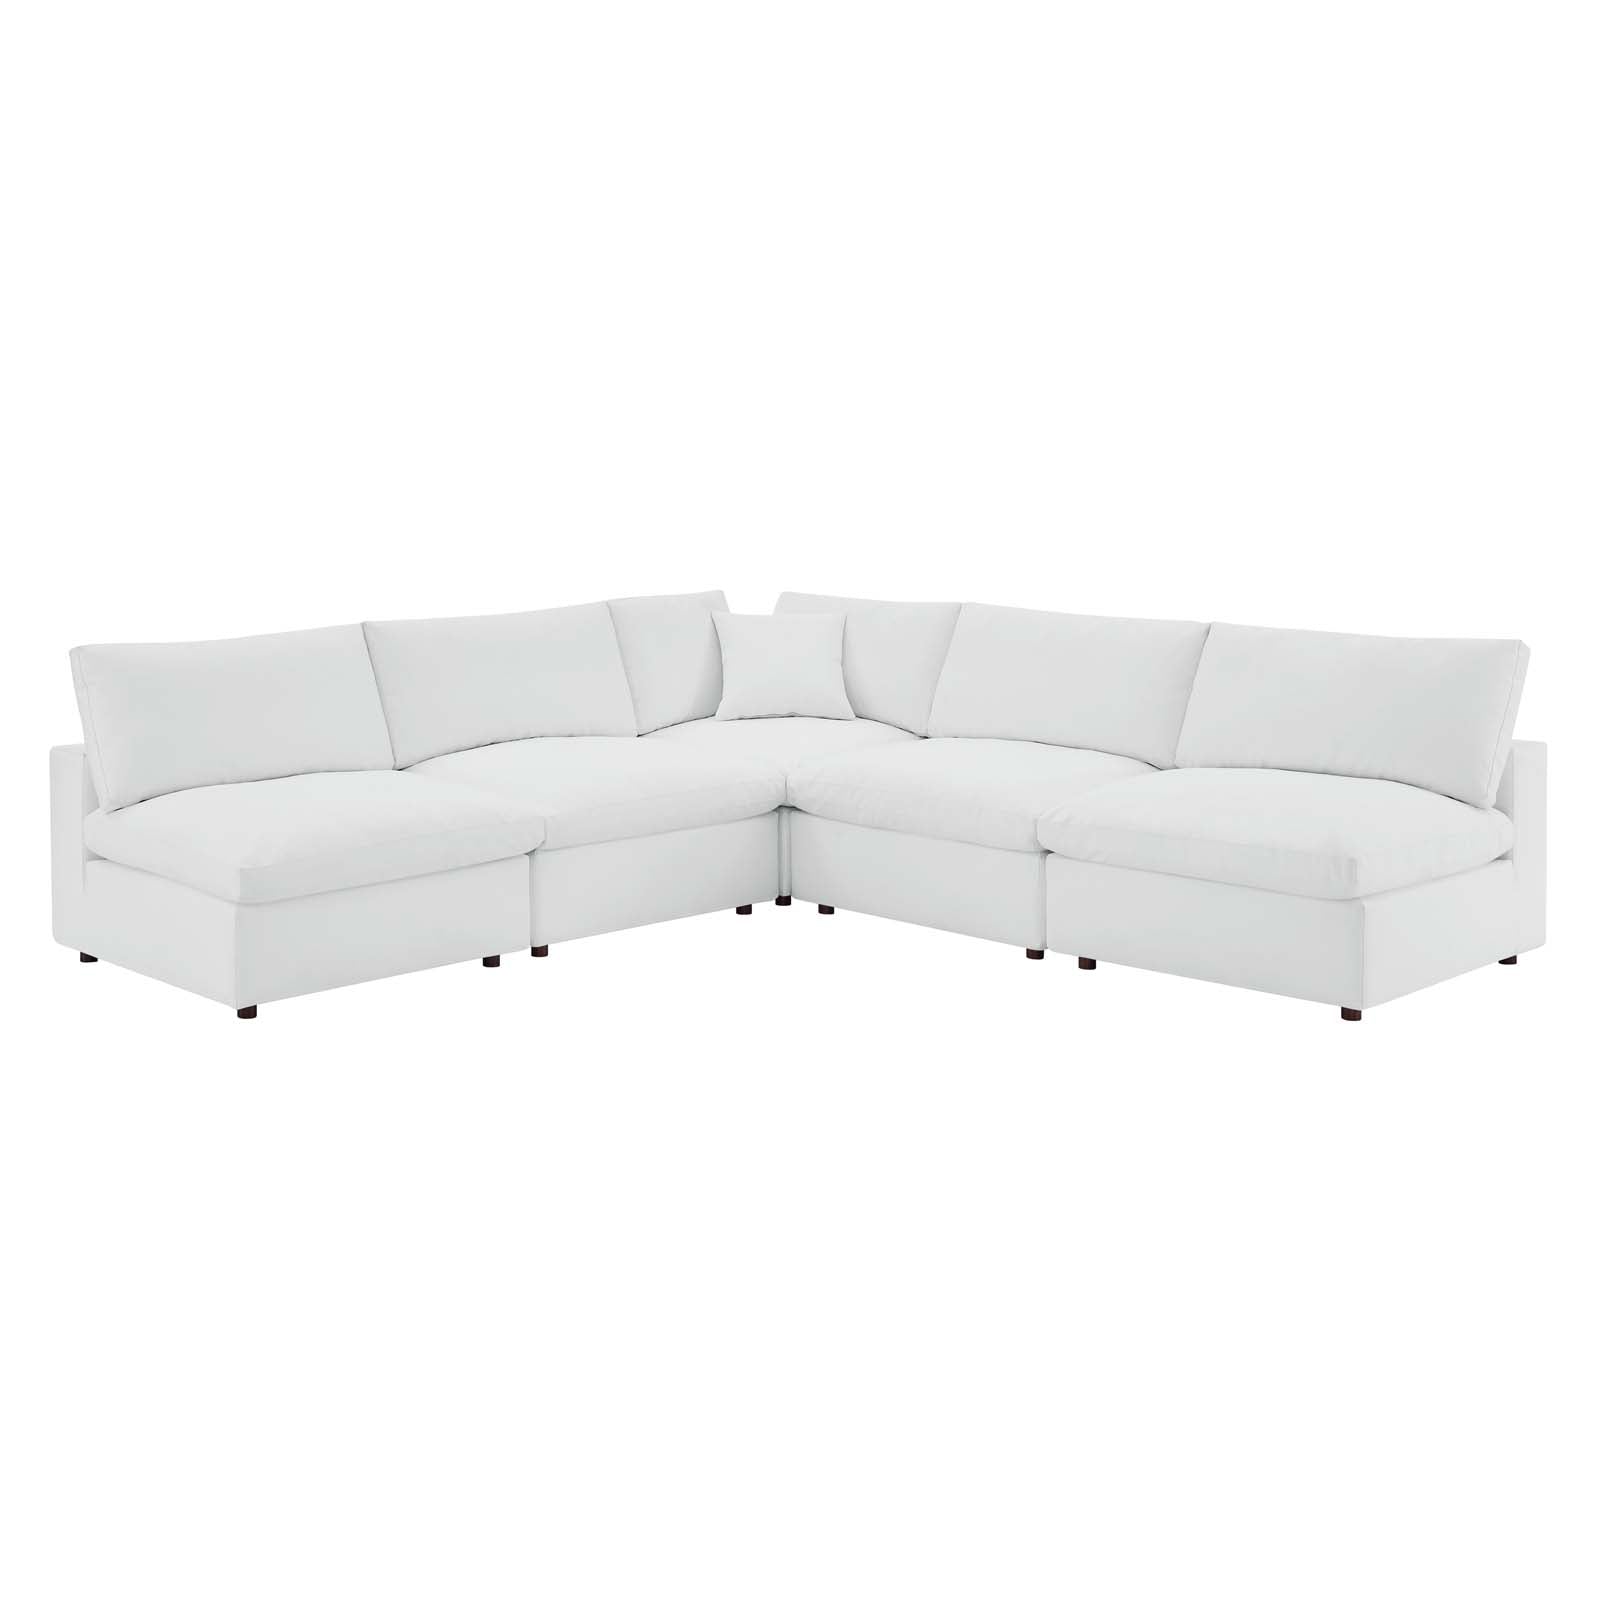 Modway Sectional Sofas - Commix Down Filled Overstuffed Vegan Leather 5 Pieces Sectional Sofa White